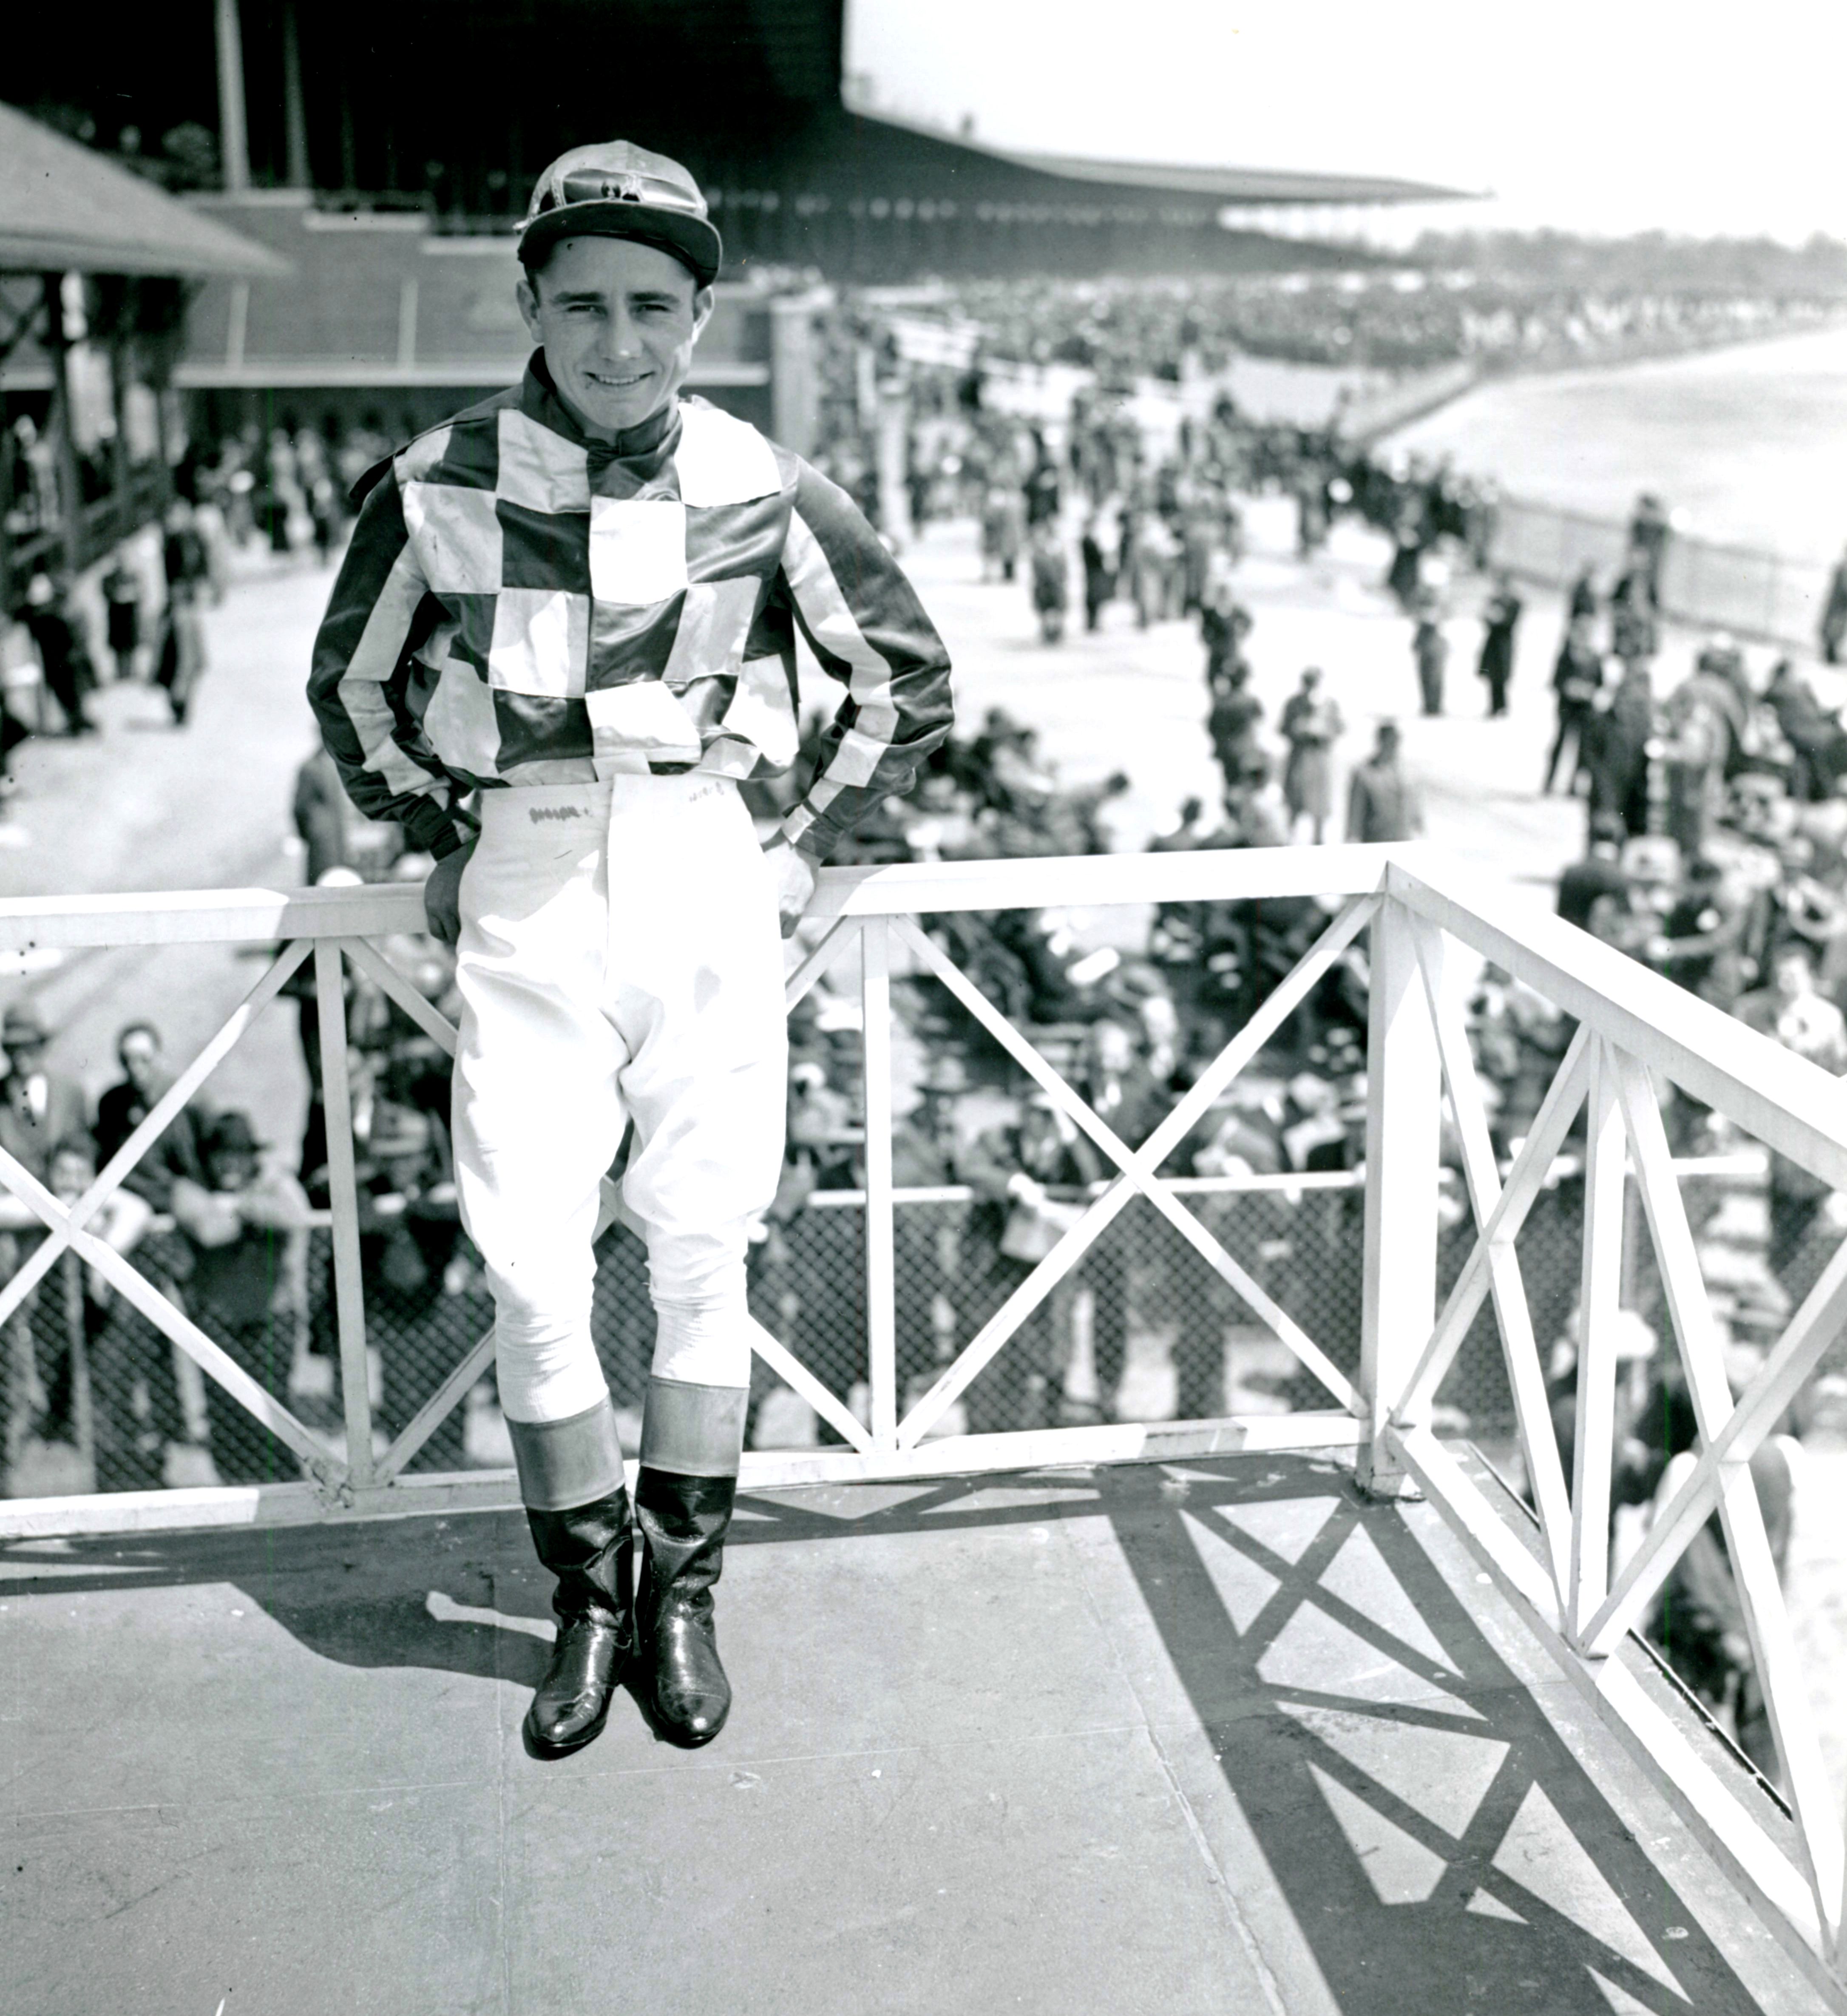 Steve Brooks at Jamaica Racetrack, April 1944 (Keeneland Library Morgan Collection/Museum Collection)